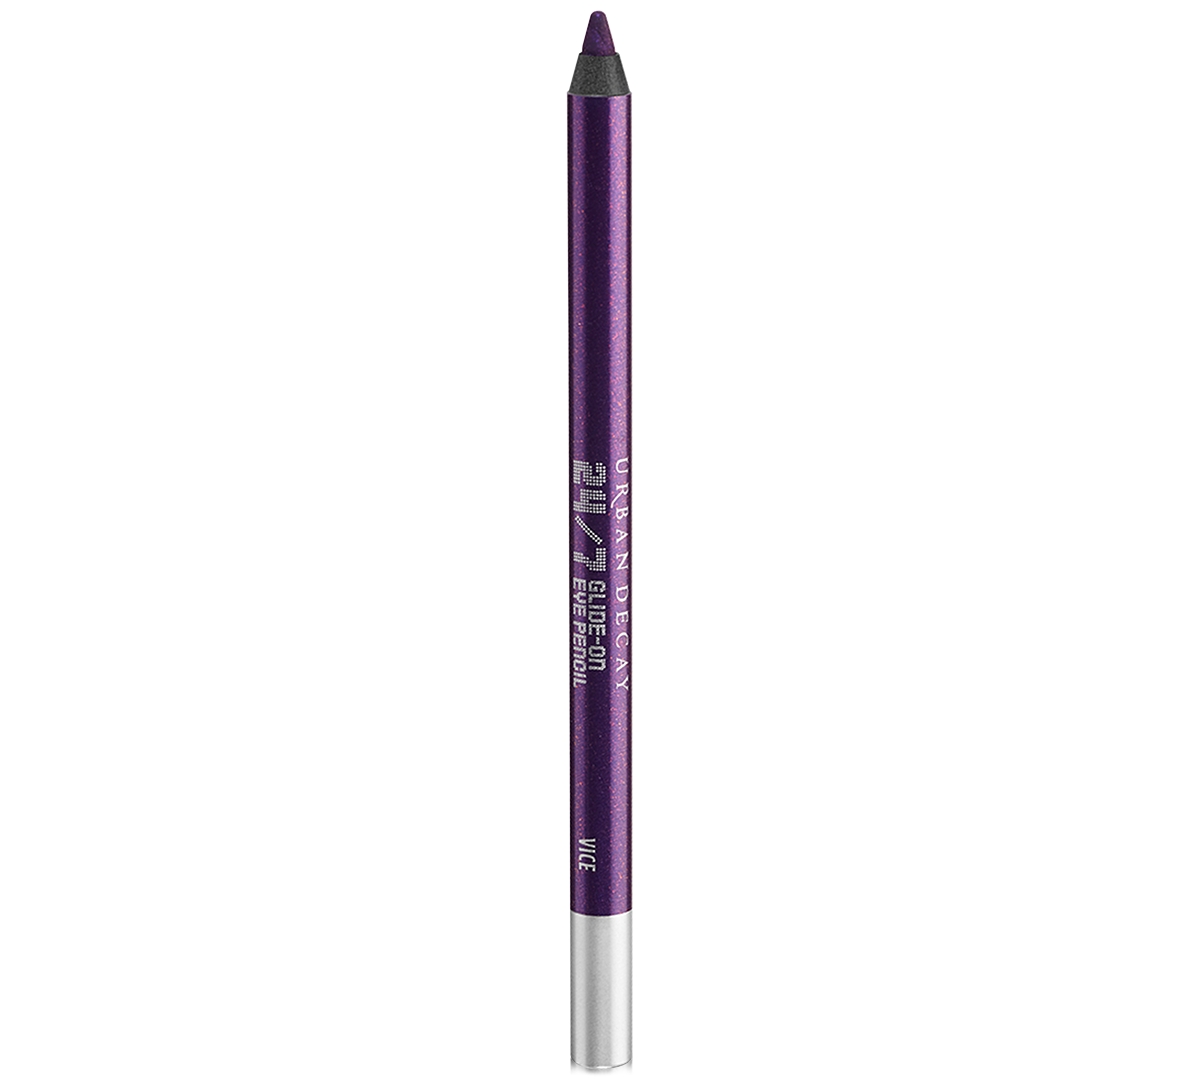 Urban Decay 24/7 Glide-on Waterproof Eyeliner Pencil In Vice (pearly Red Eggplant Shimmer)